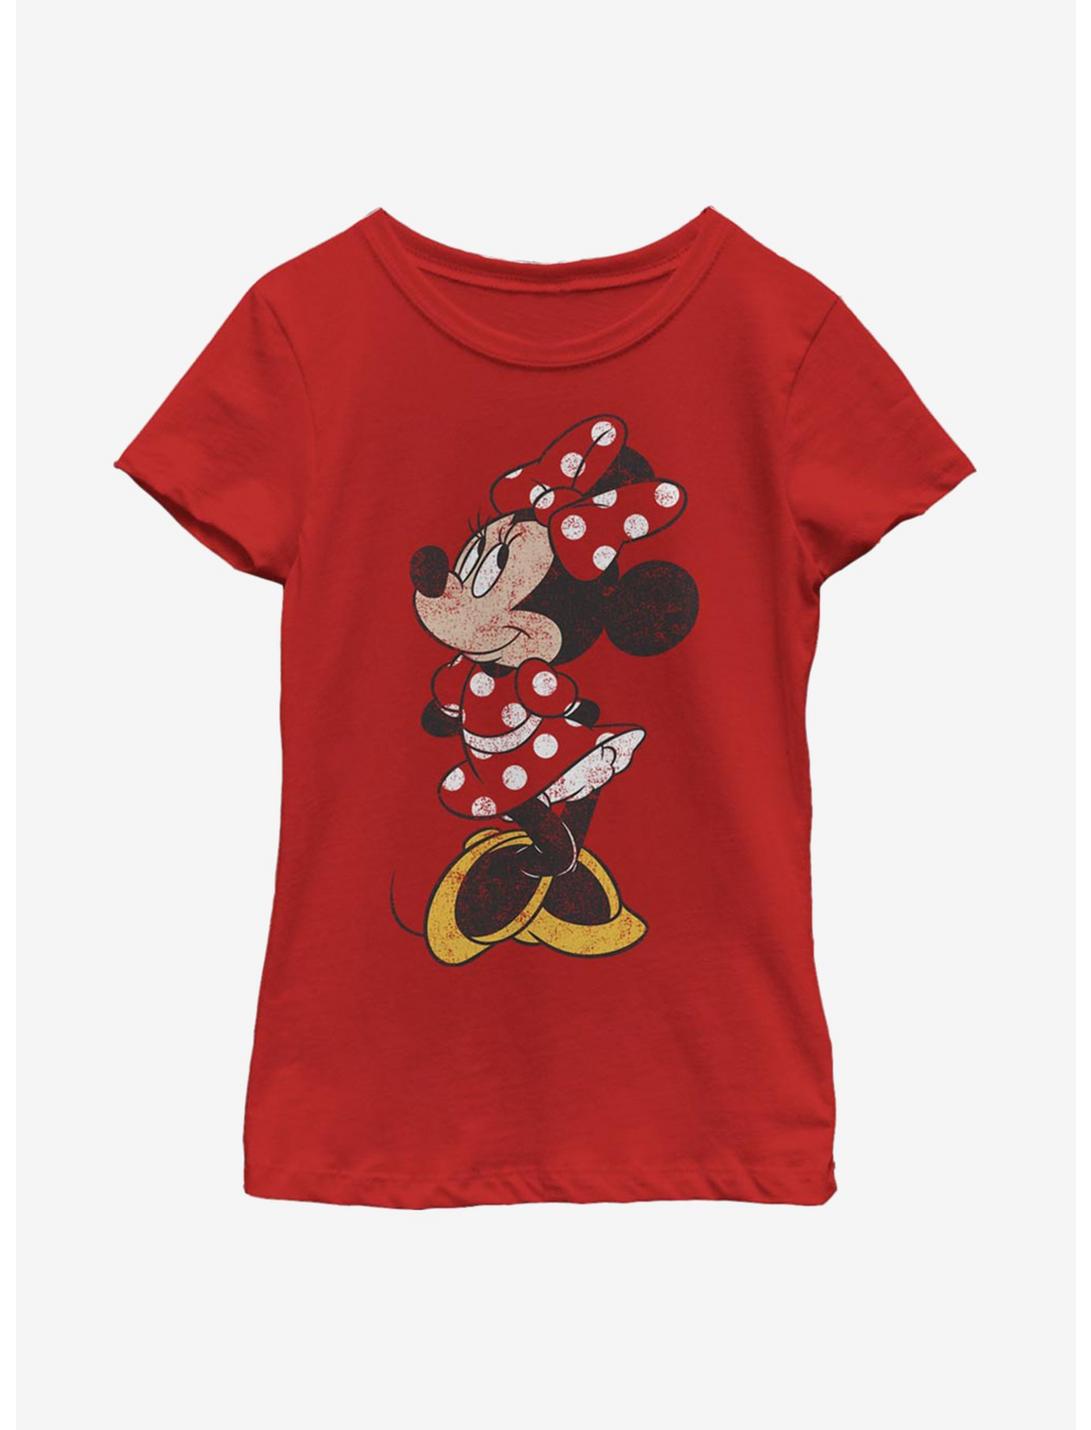 Disney Mickey Mouse Modern Vintage Minnie Youth Girls T-Shirt, RED, hi-res